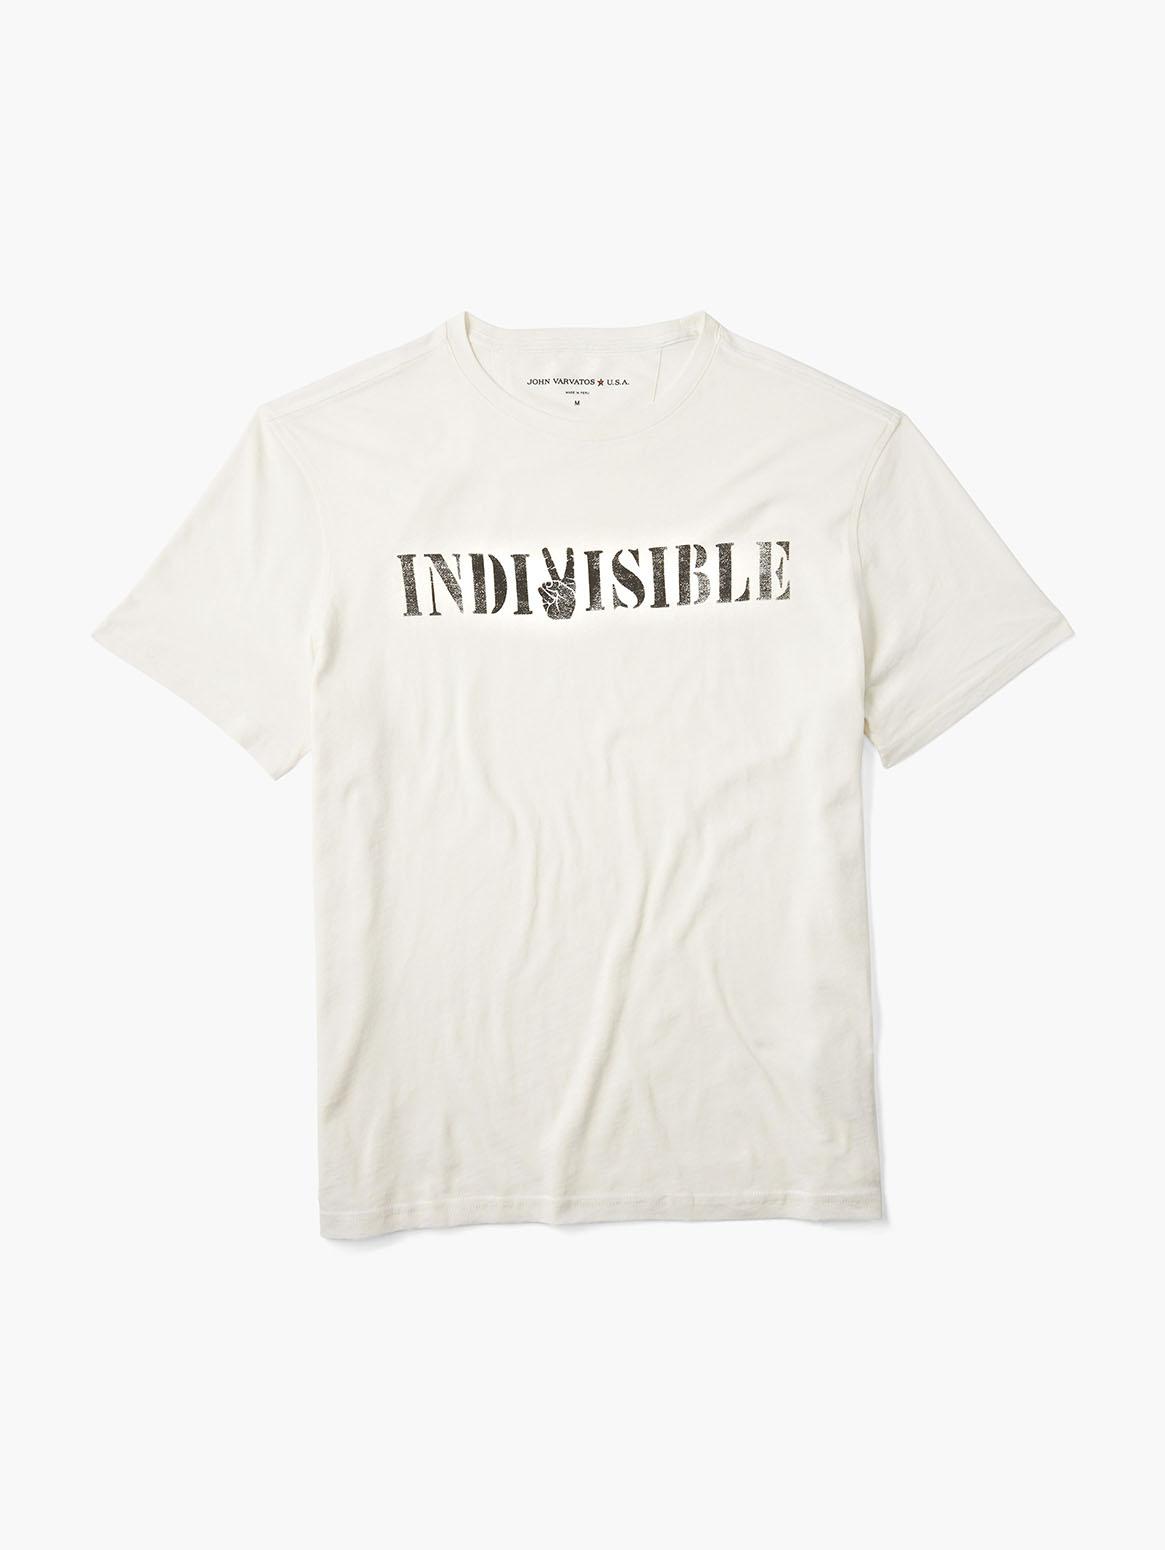 INDIVISIBLE TEE image number 1